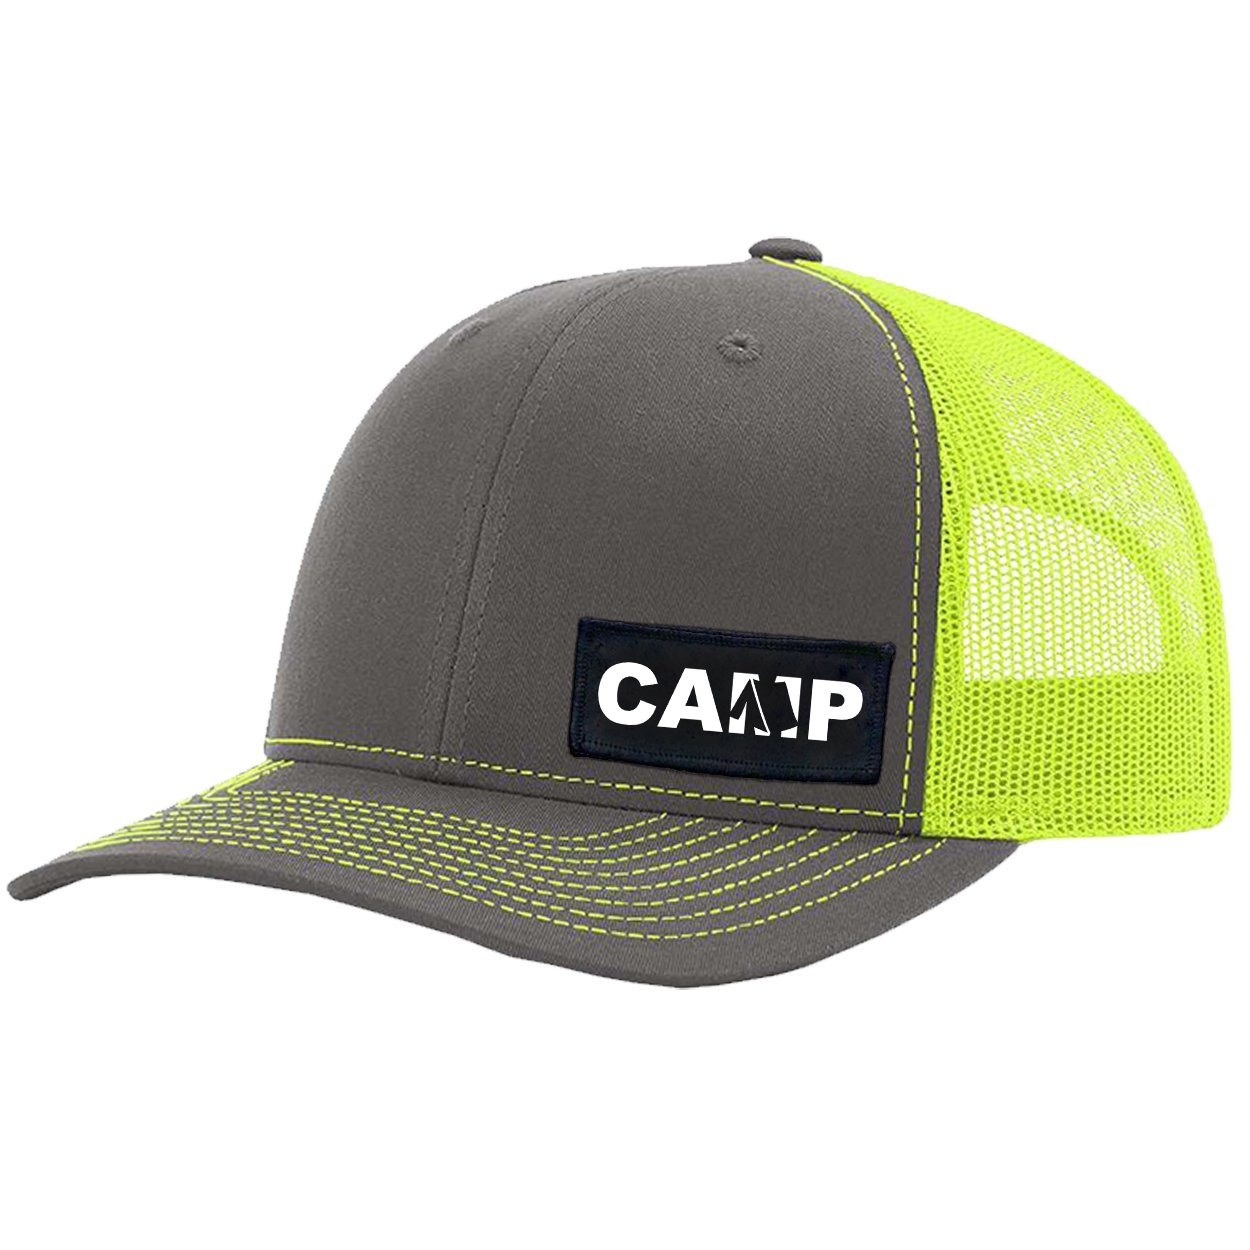 Camp Tent Logo Night Out Woven Patch Snapback Trucker Hat Charcoal/Neon Yellow (White Logo)